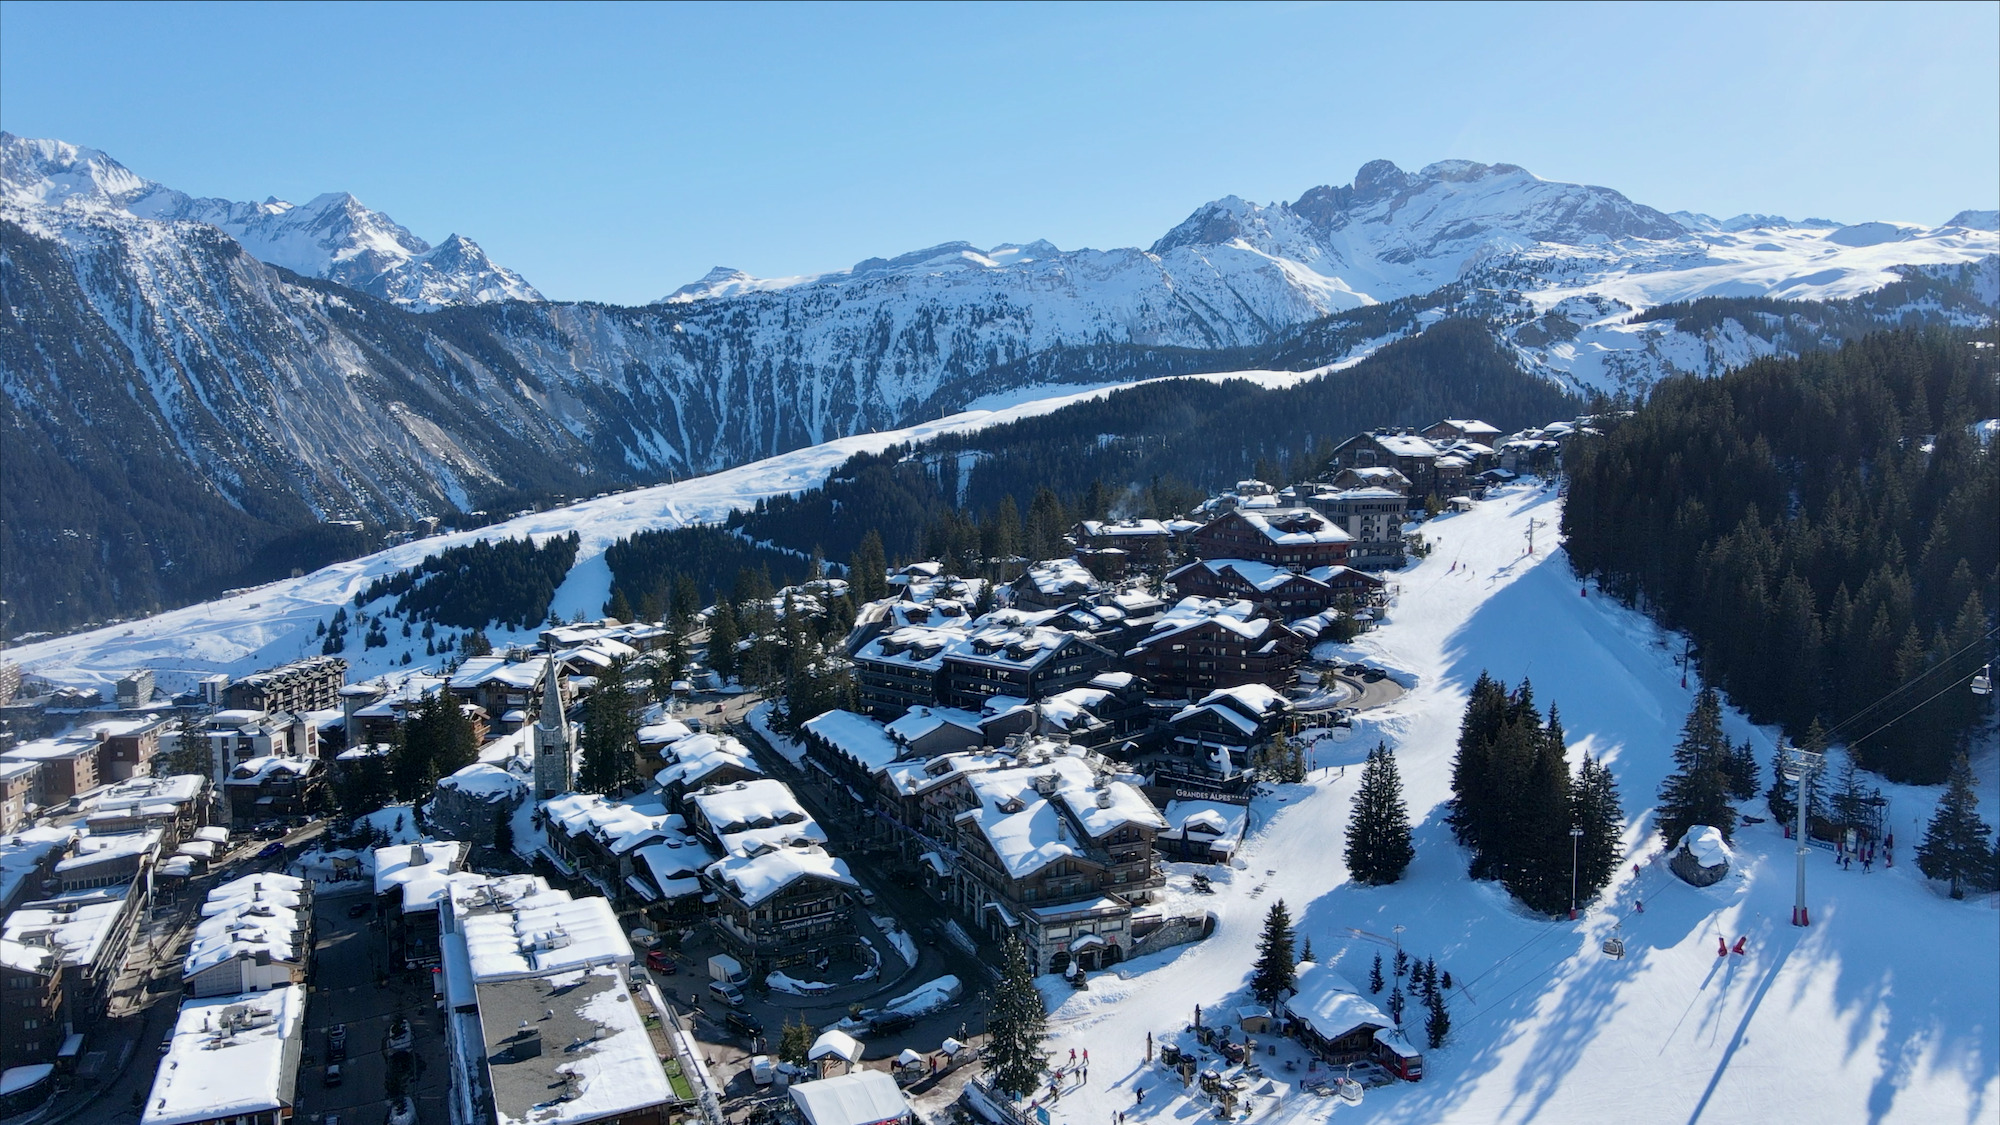 Ski Holiday in Courchevel 1850 - Why is this French ski resort so